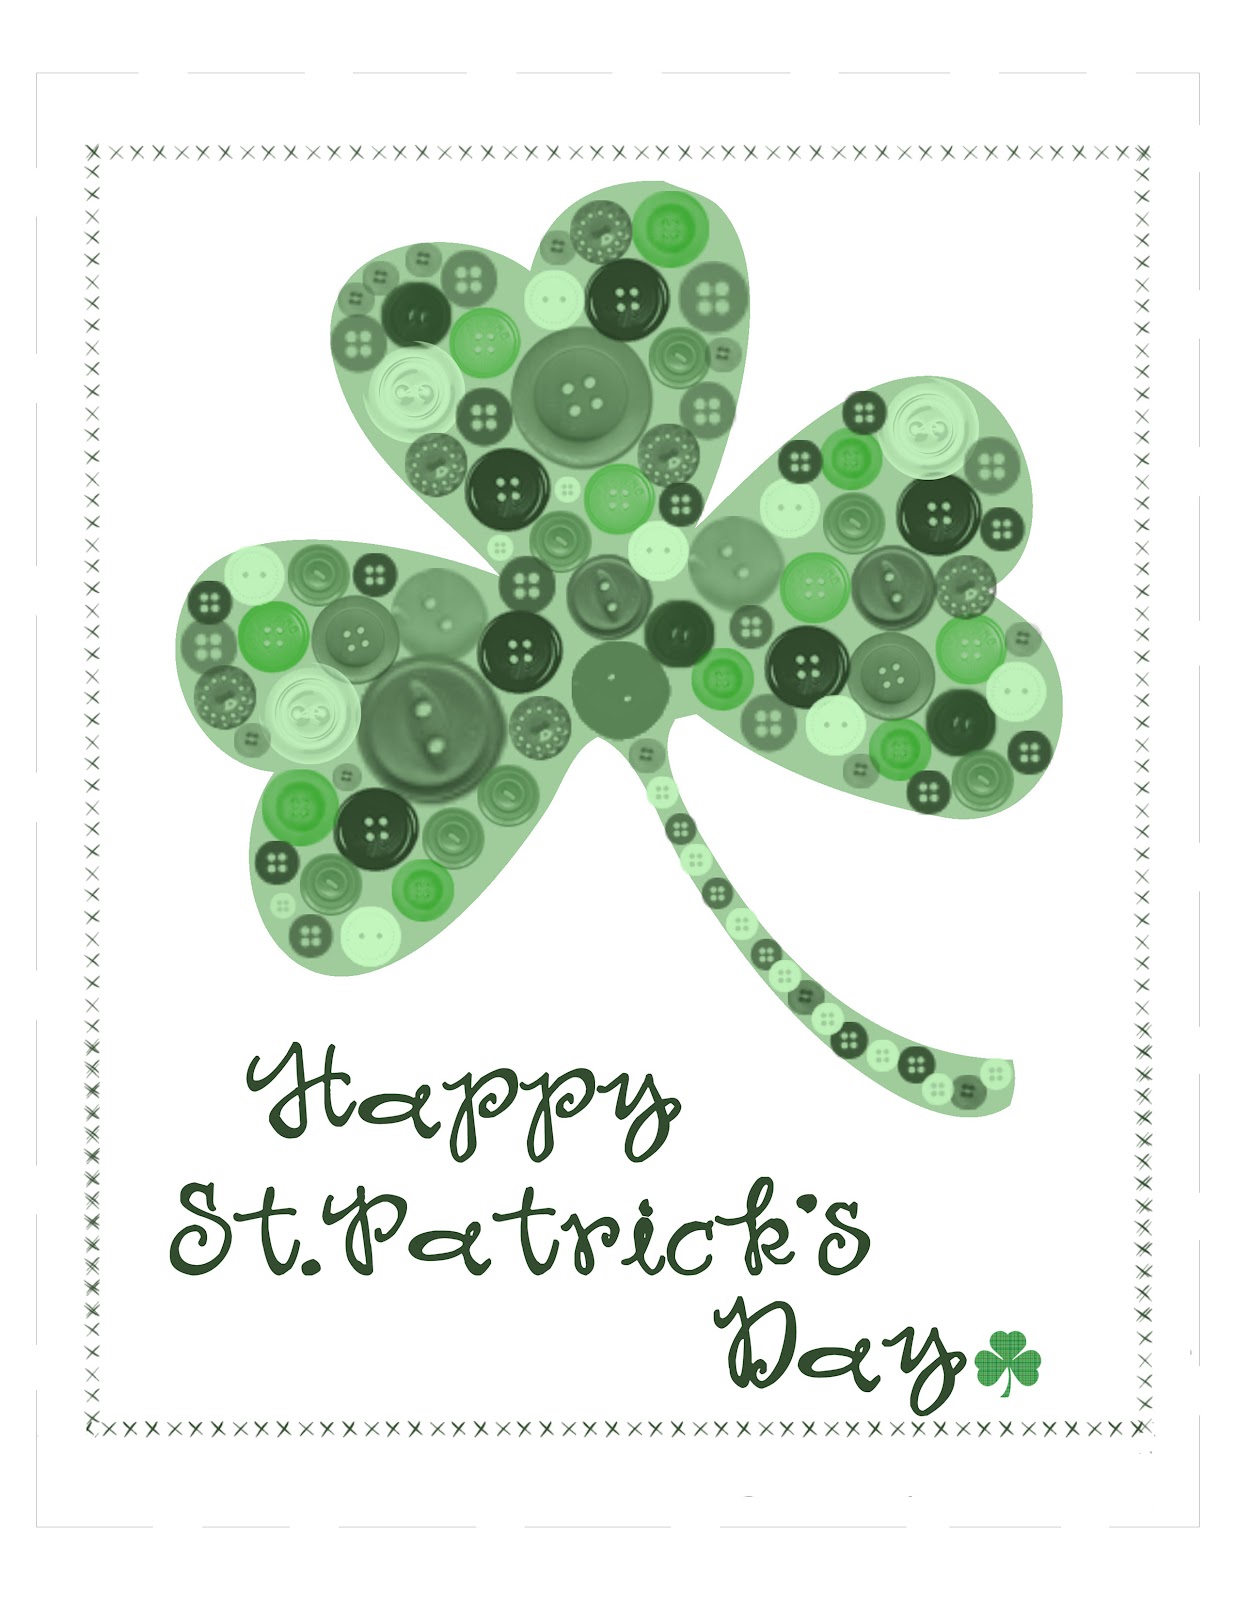 10 Fabulous Free Printables for St. Patrick's Day » Dollar Store Crafts